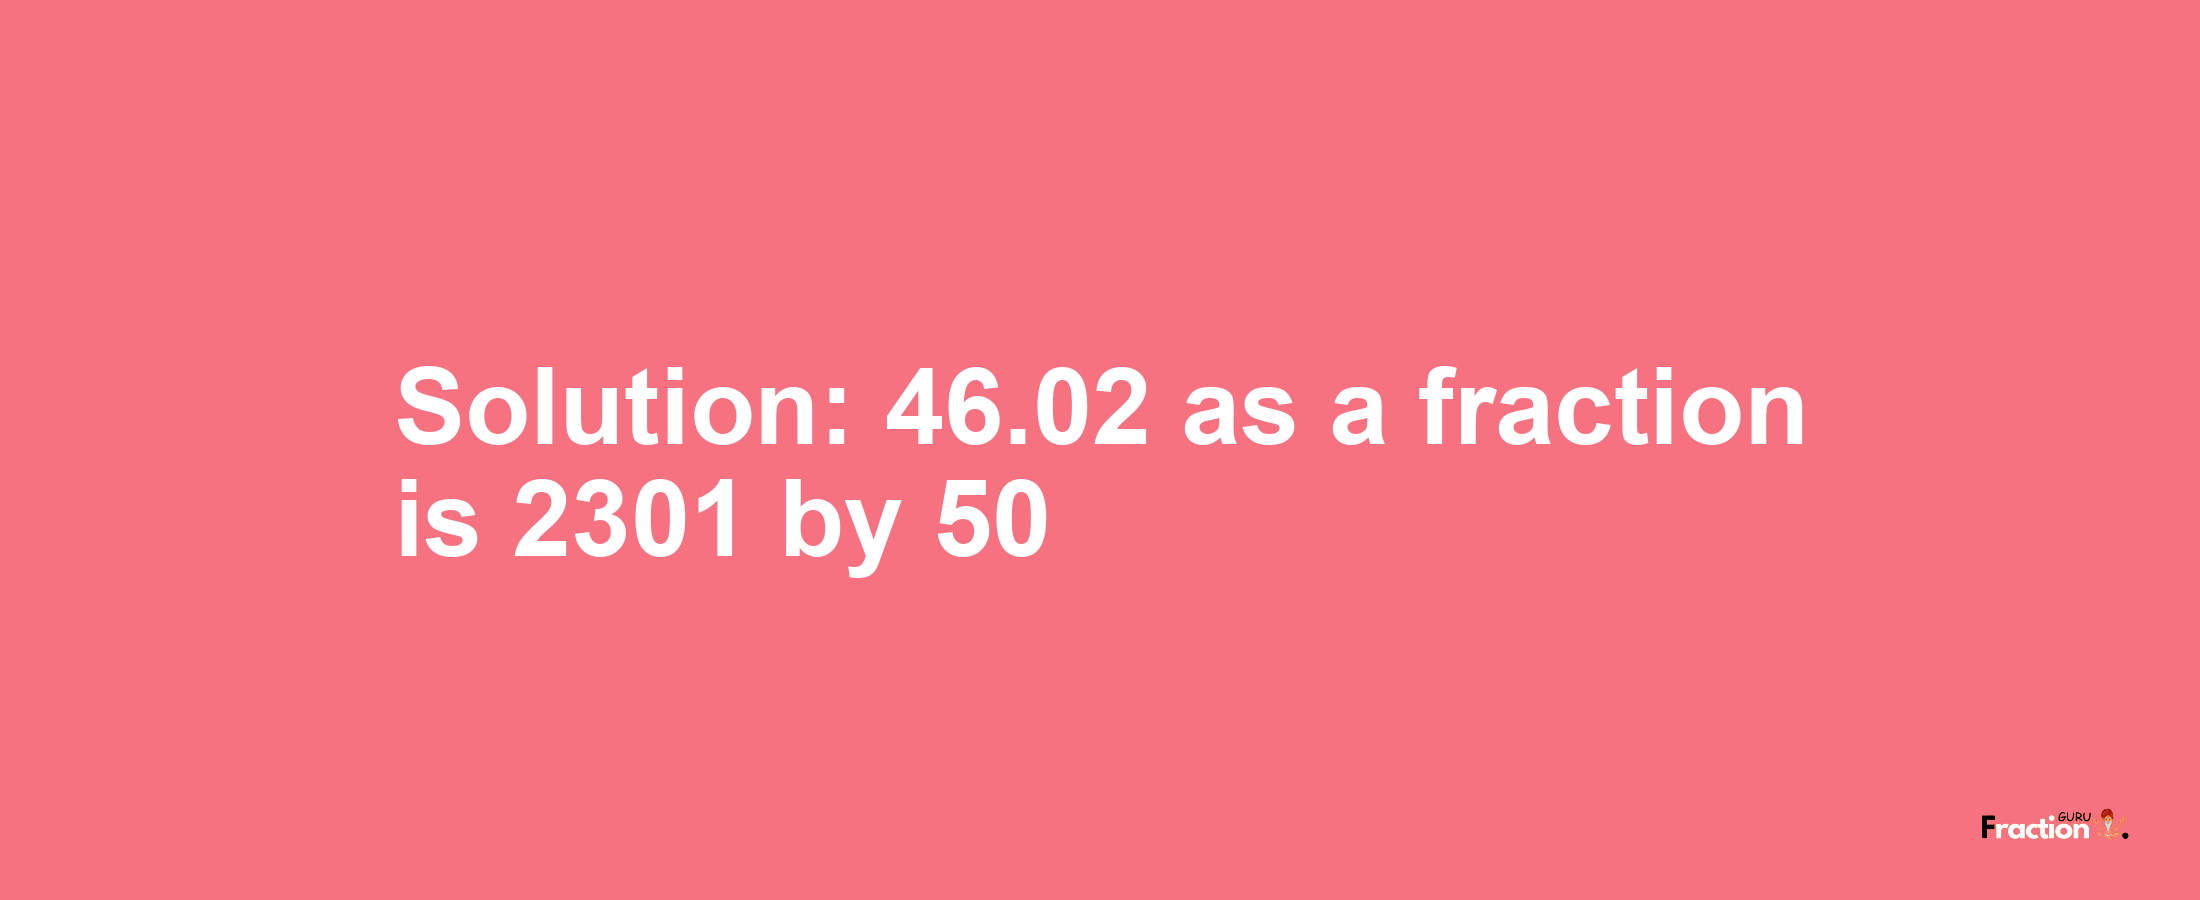 Solution:46.02 as a fraction is 2301/50